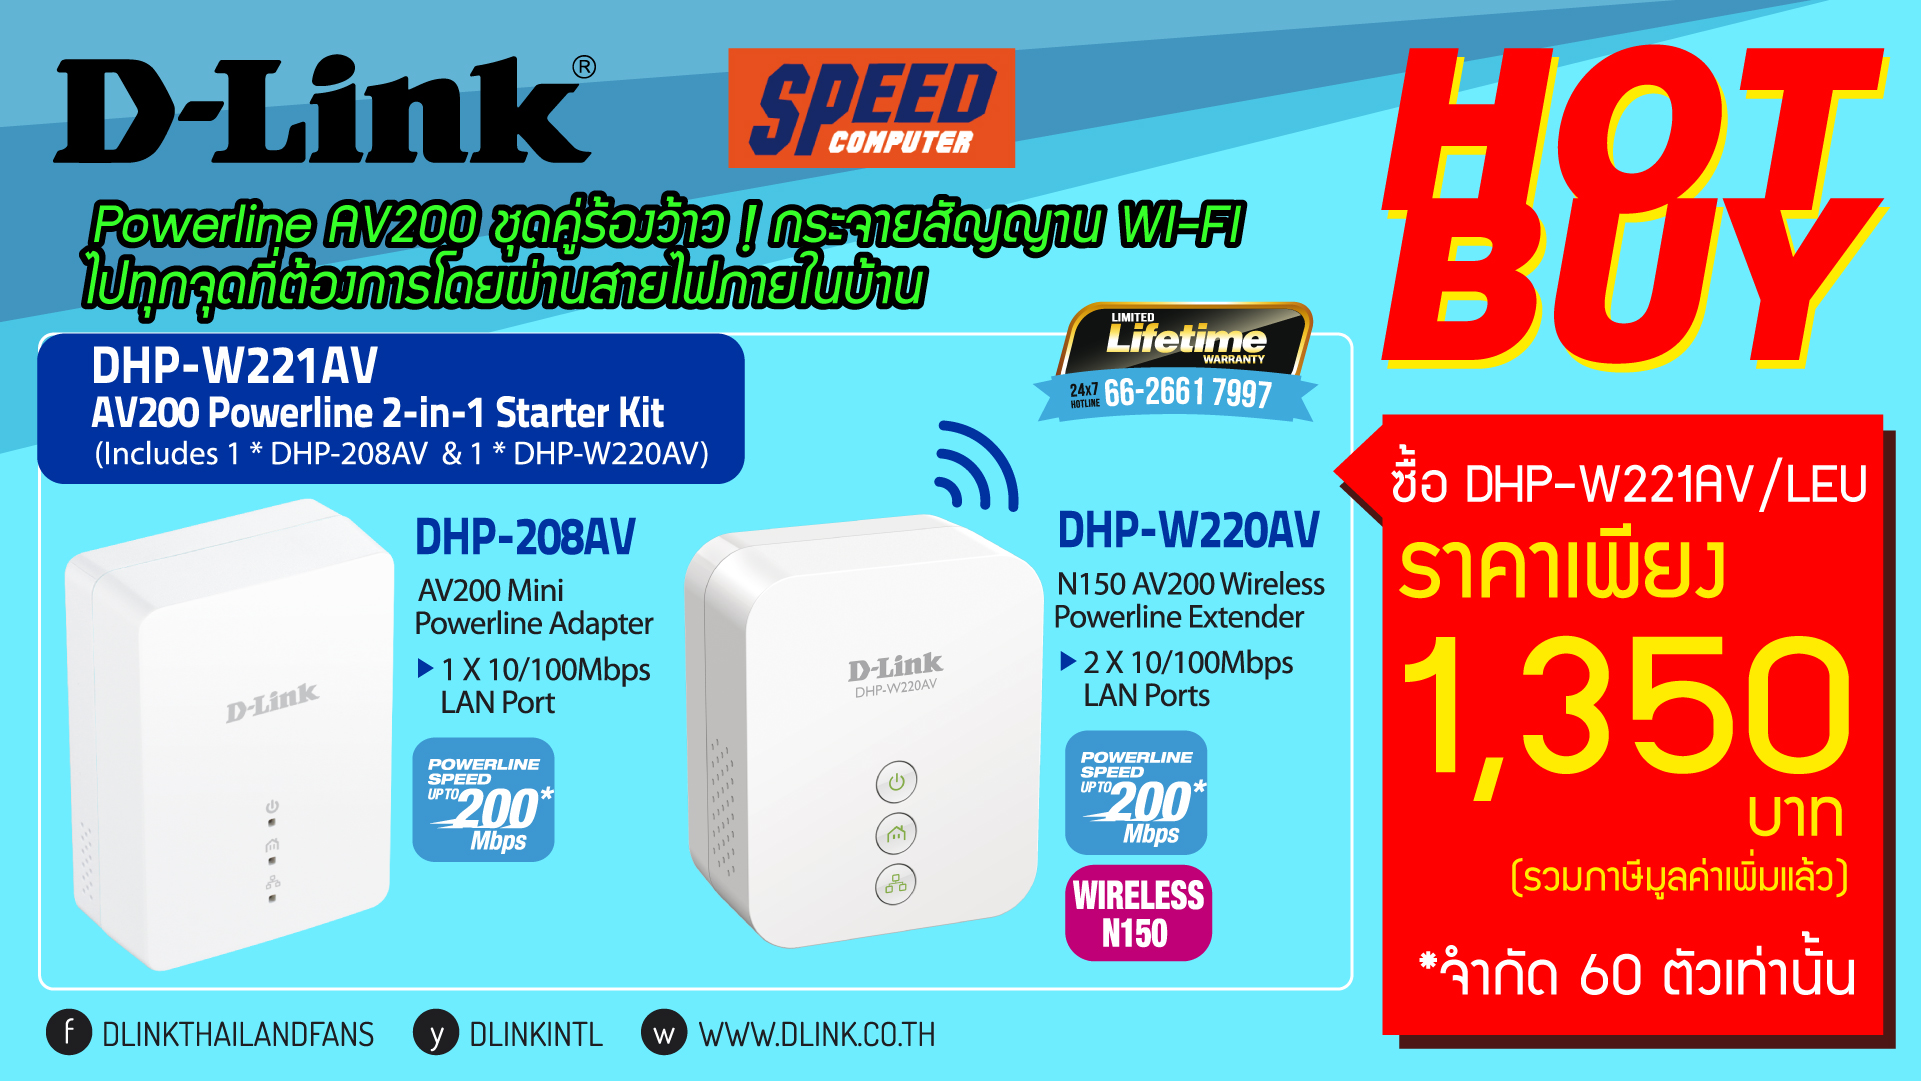 D-Link-Commart-Screen-for-Speed-March-16-02